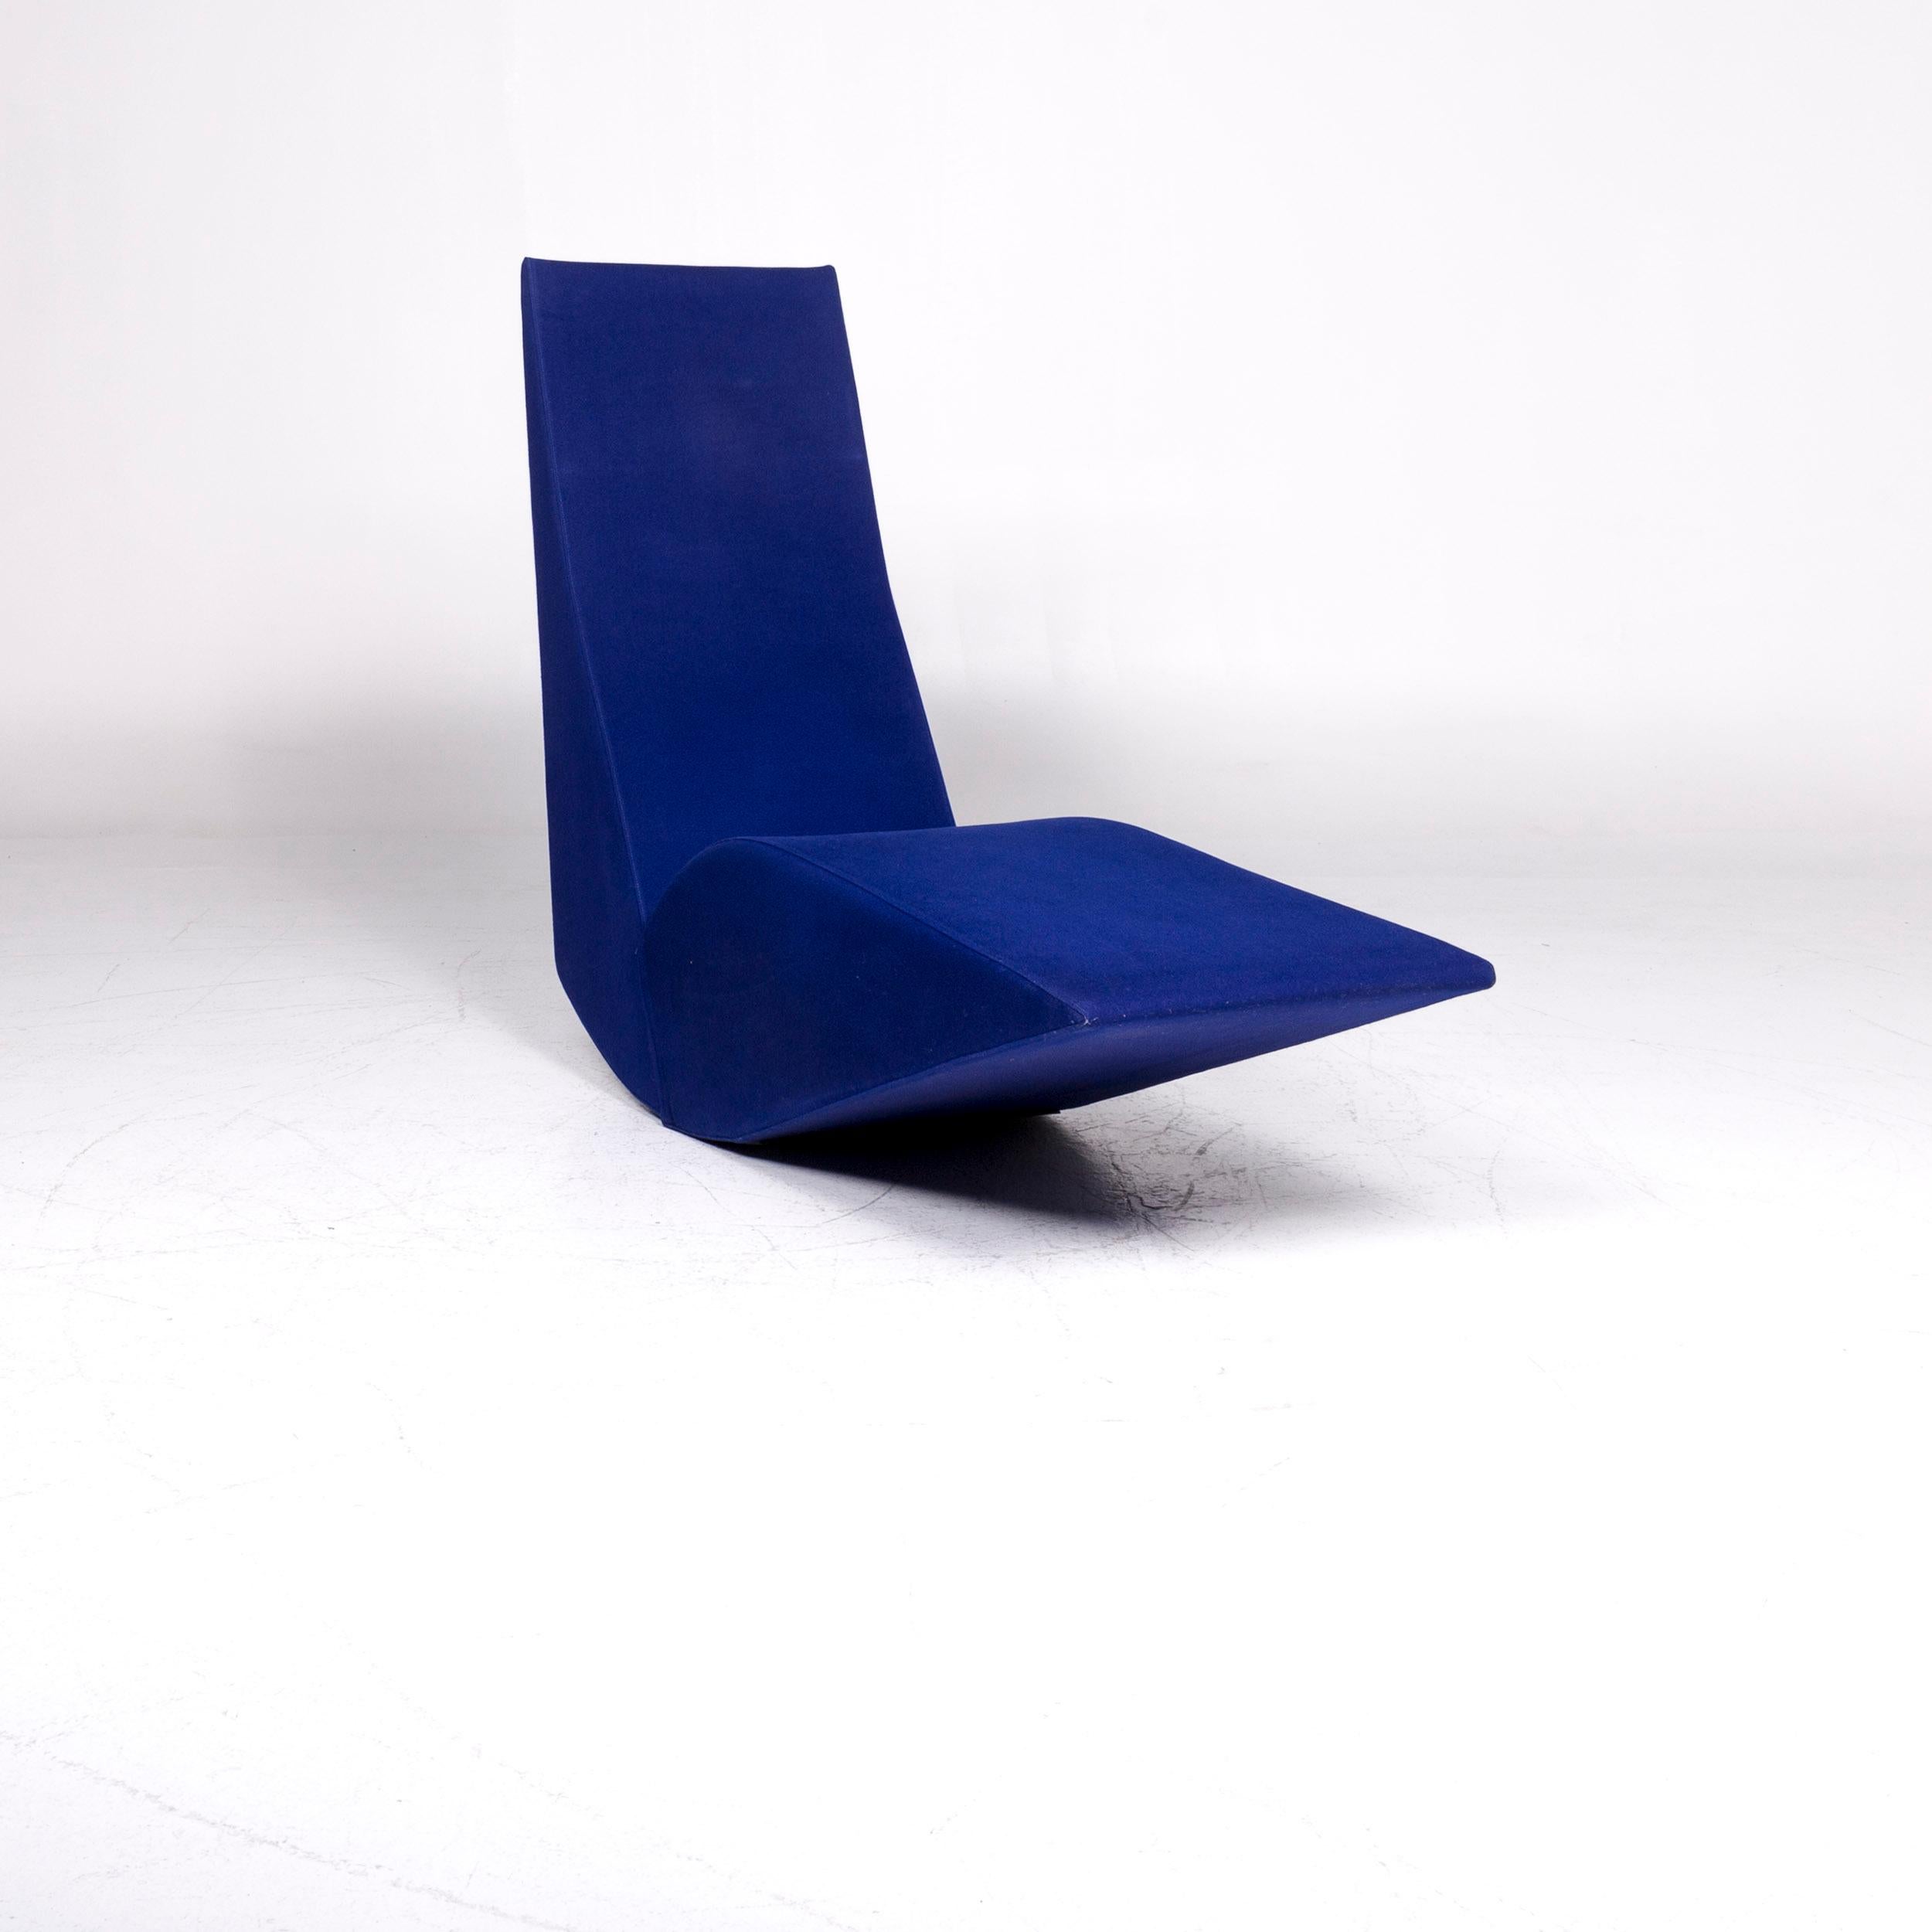 We bring to you a Cappellini bird fabric lounger blue tom Dixon armchair.
 
Product measurements in centimetres:
 
Depth 165
Width 51
Height 113
Seat-height 44
Seat-depth 123
Seat-width 51
Back-height 77.

  